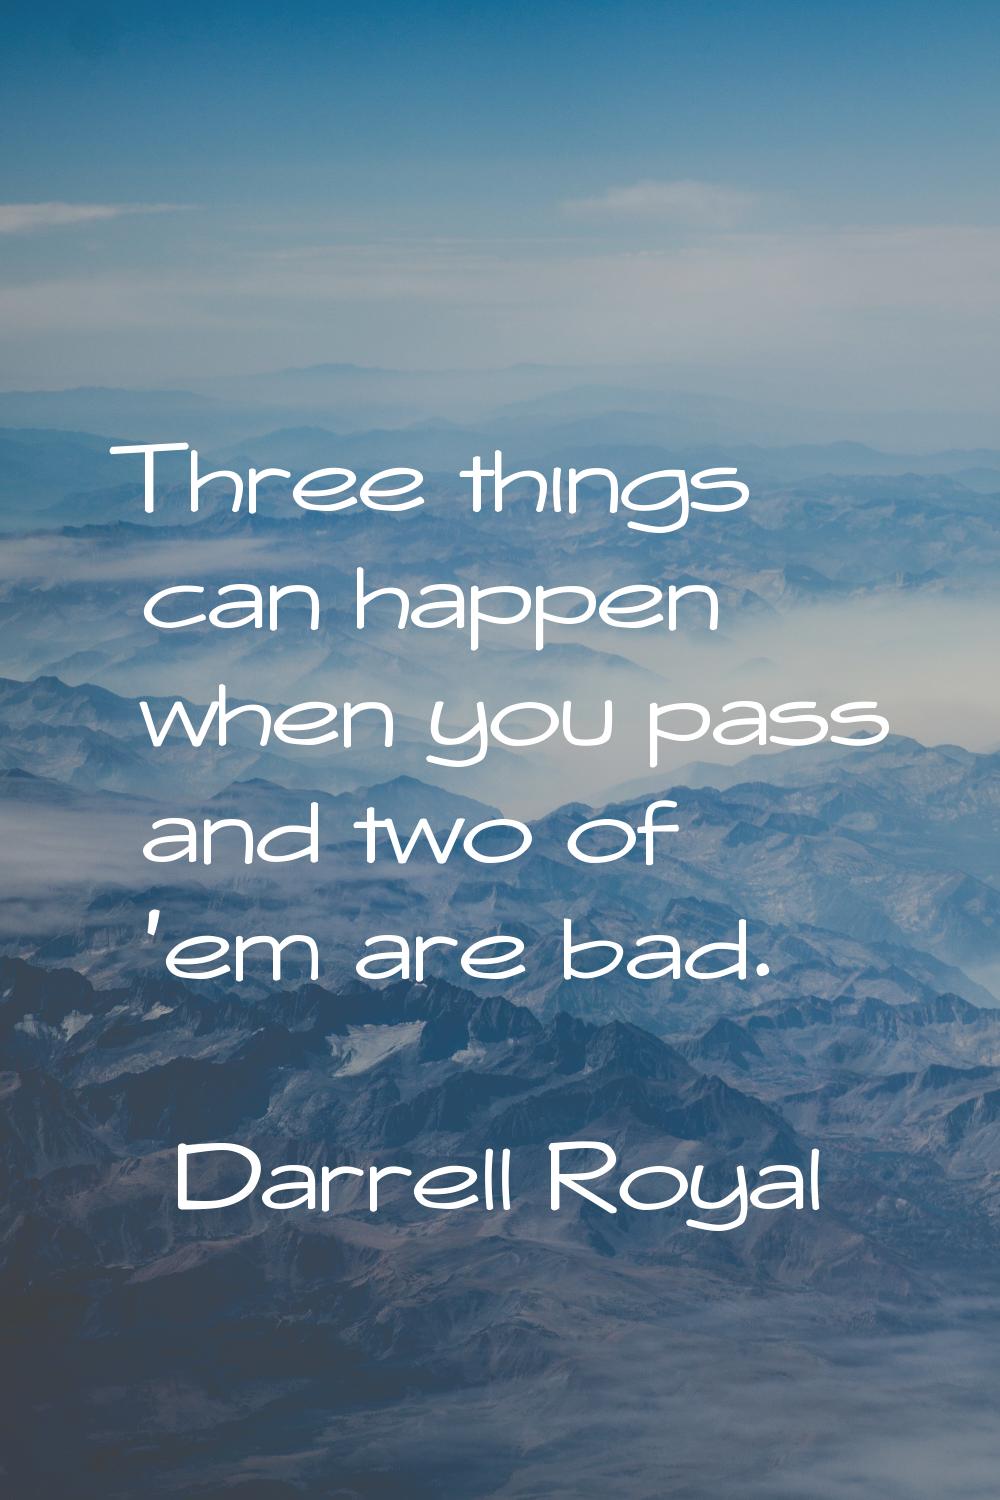 Three things can happen when you pass and two of 'em are bad.